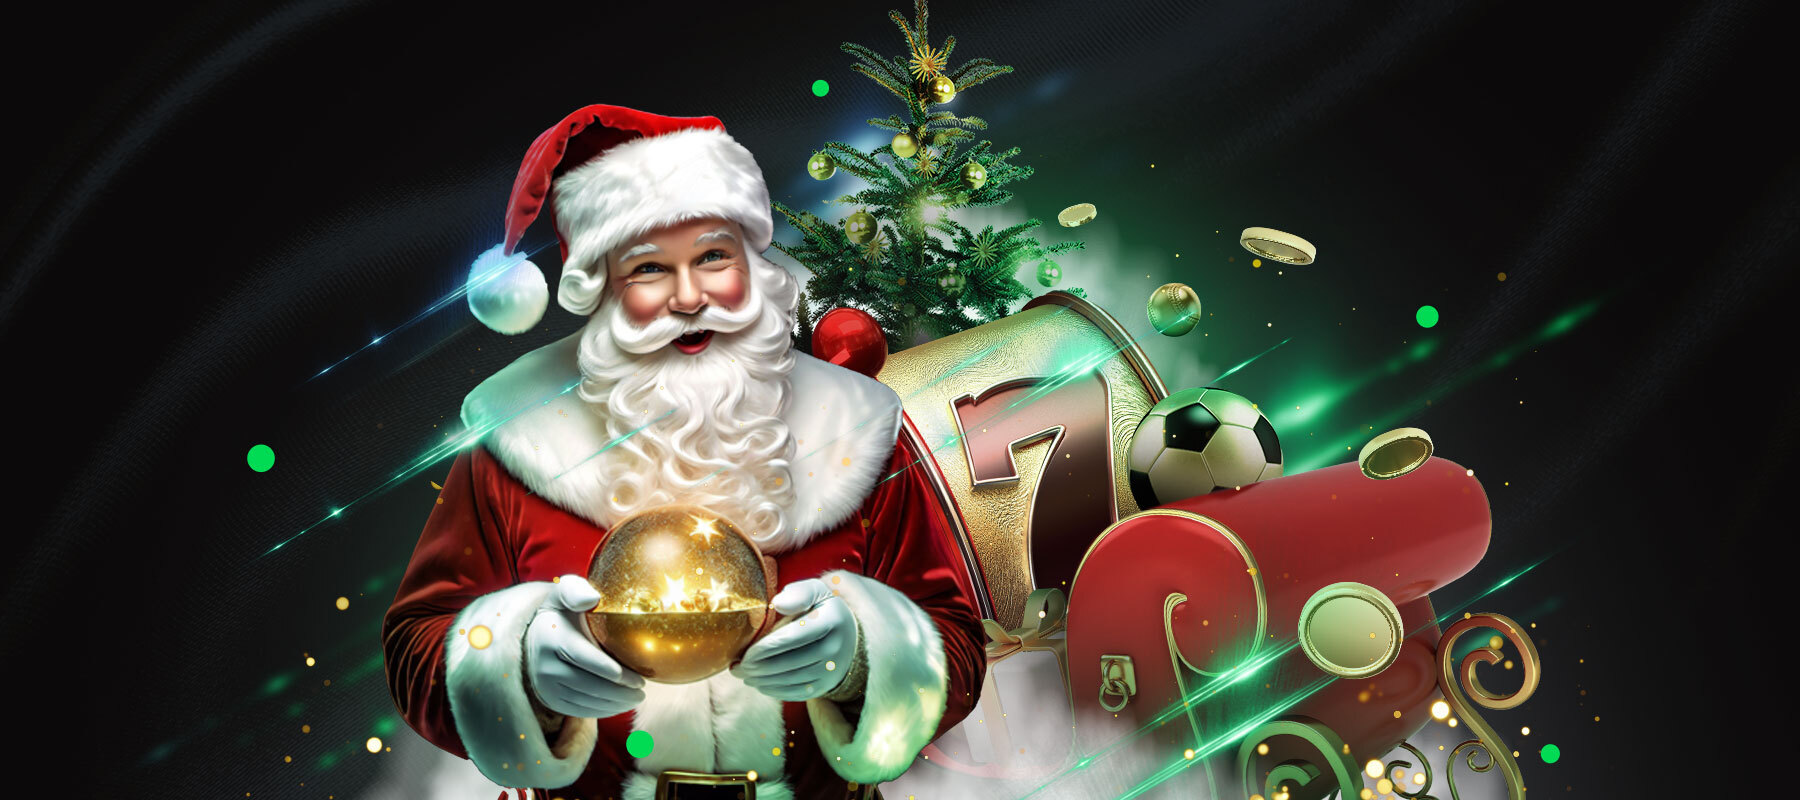 Santa’s Sleigh of Surprises arrives with 50,000 USDT and daily rewards